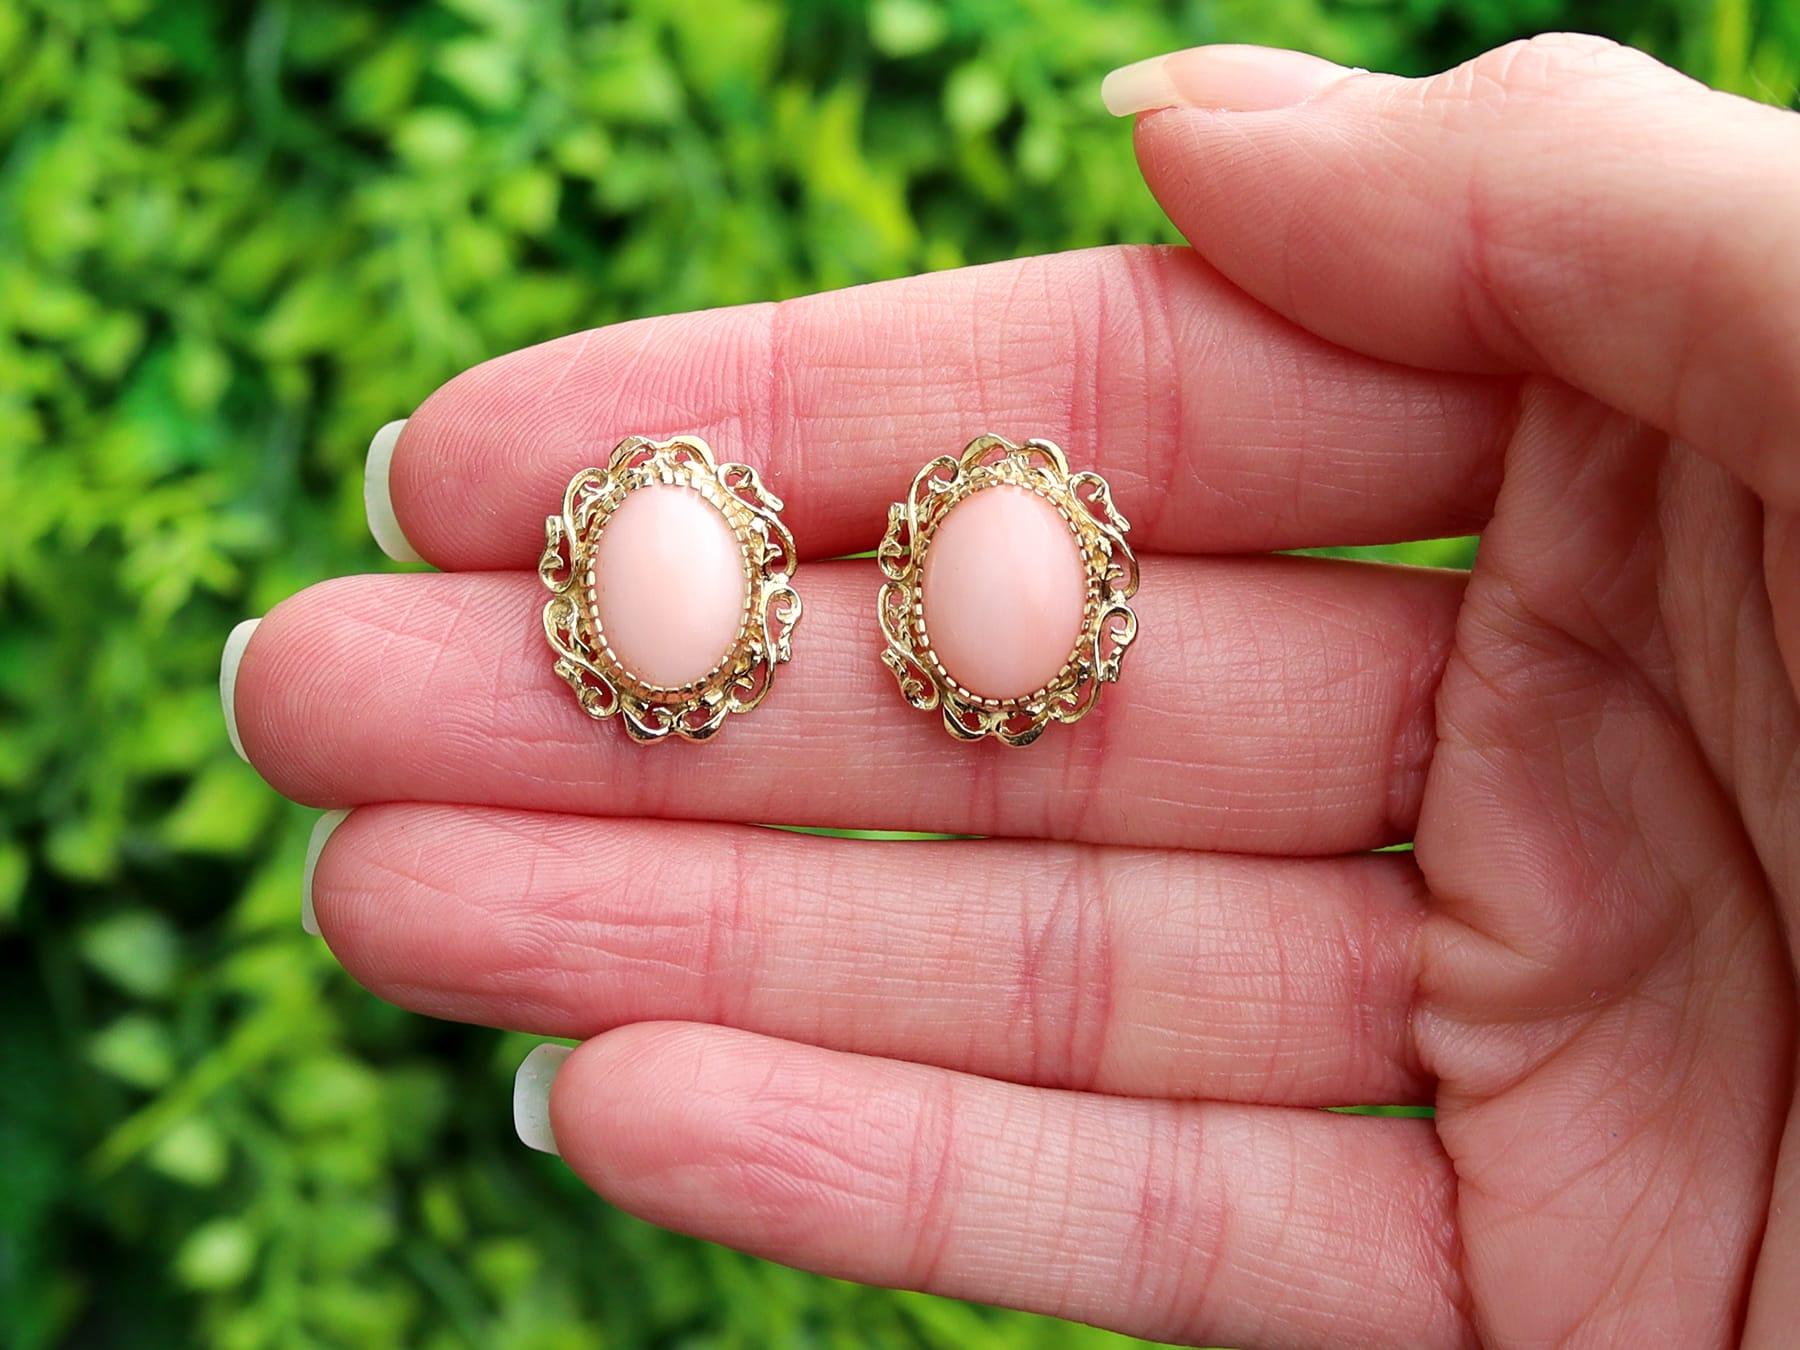 An impressive pair of vintage 1960s 5.75Ct pink coral and 18 karat yellow gold stud earrings; part of our diverse vintage jewelry and estate jewelry collections.

These fine and impressive vintage cabochon cut earrings have been crafted in 18k